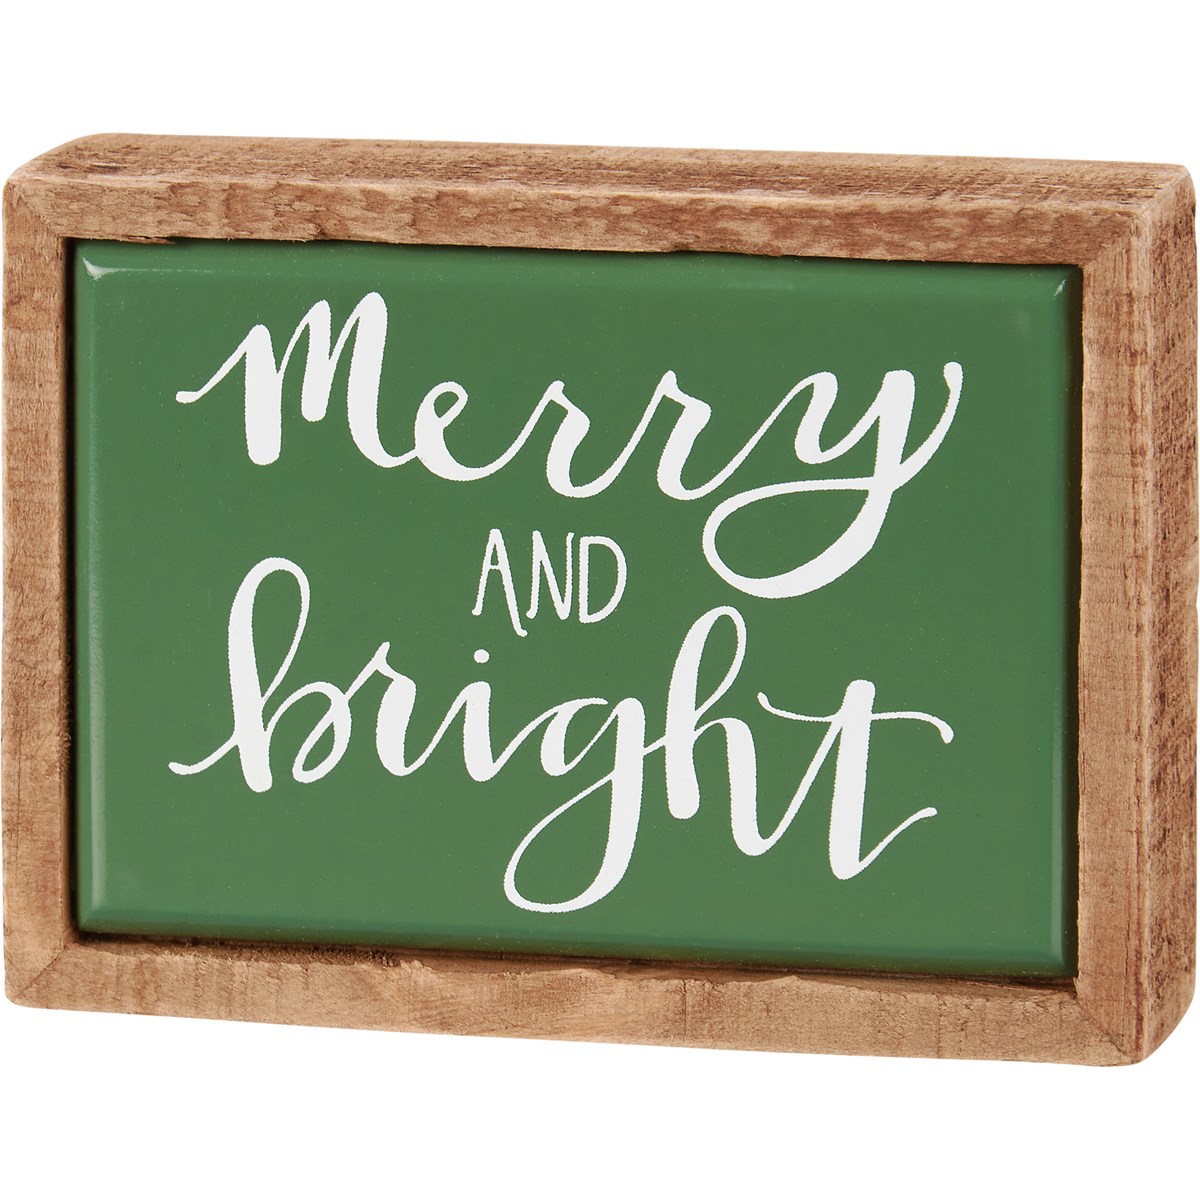 Merry And Bright Green Box Sign Mini - Wood